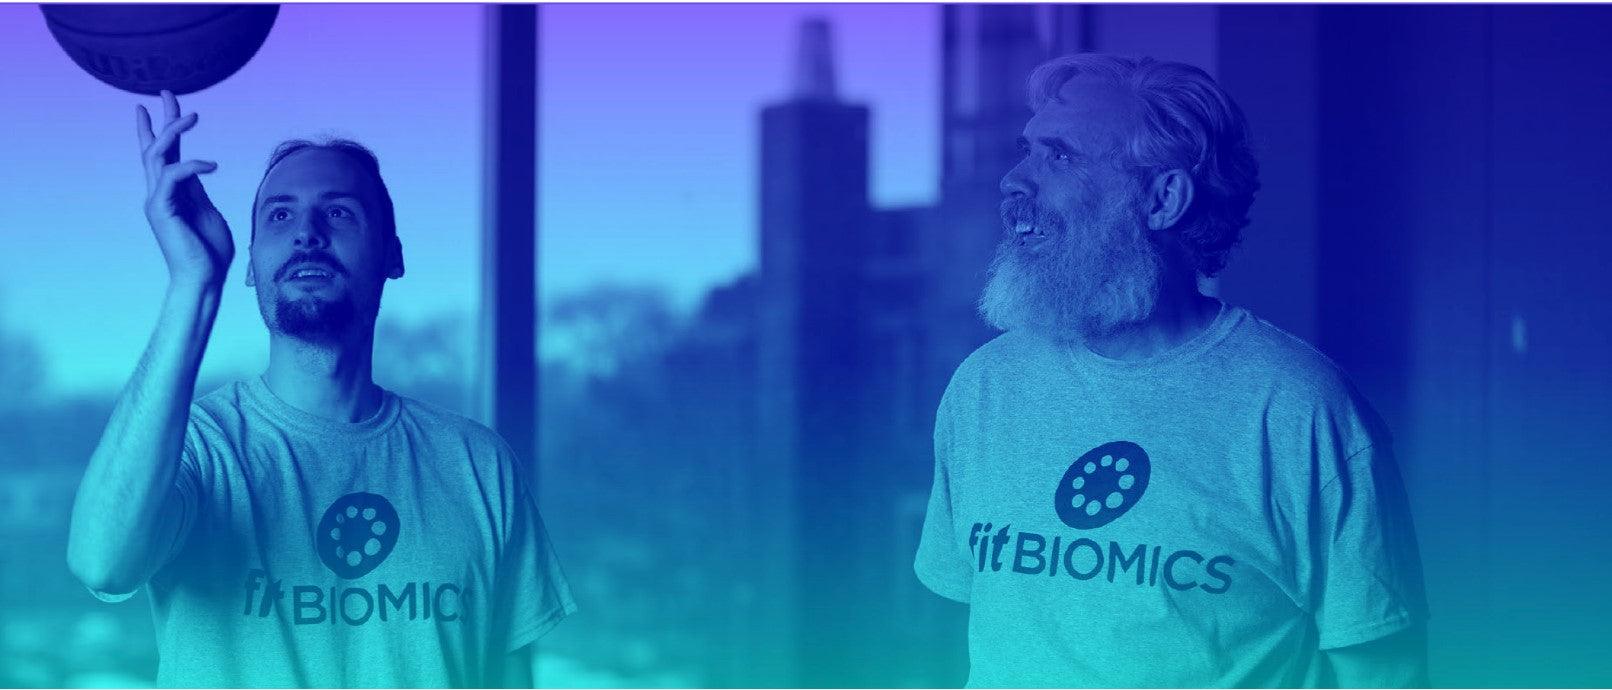 Our Story - Fitbiomics